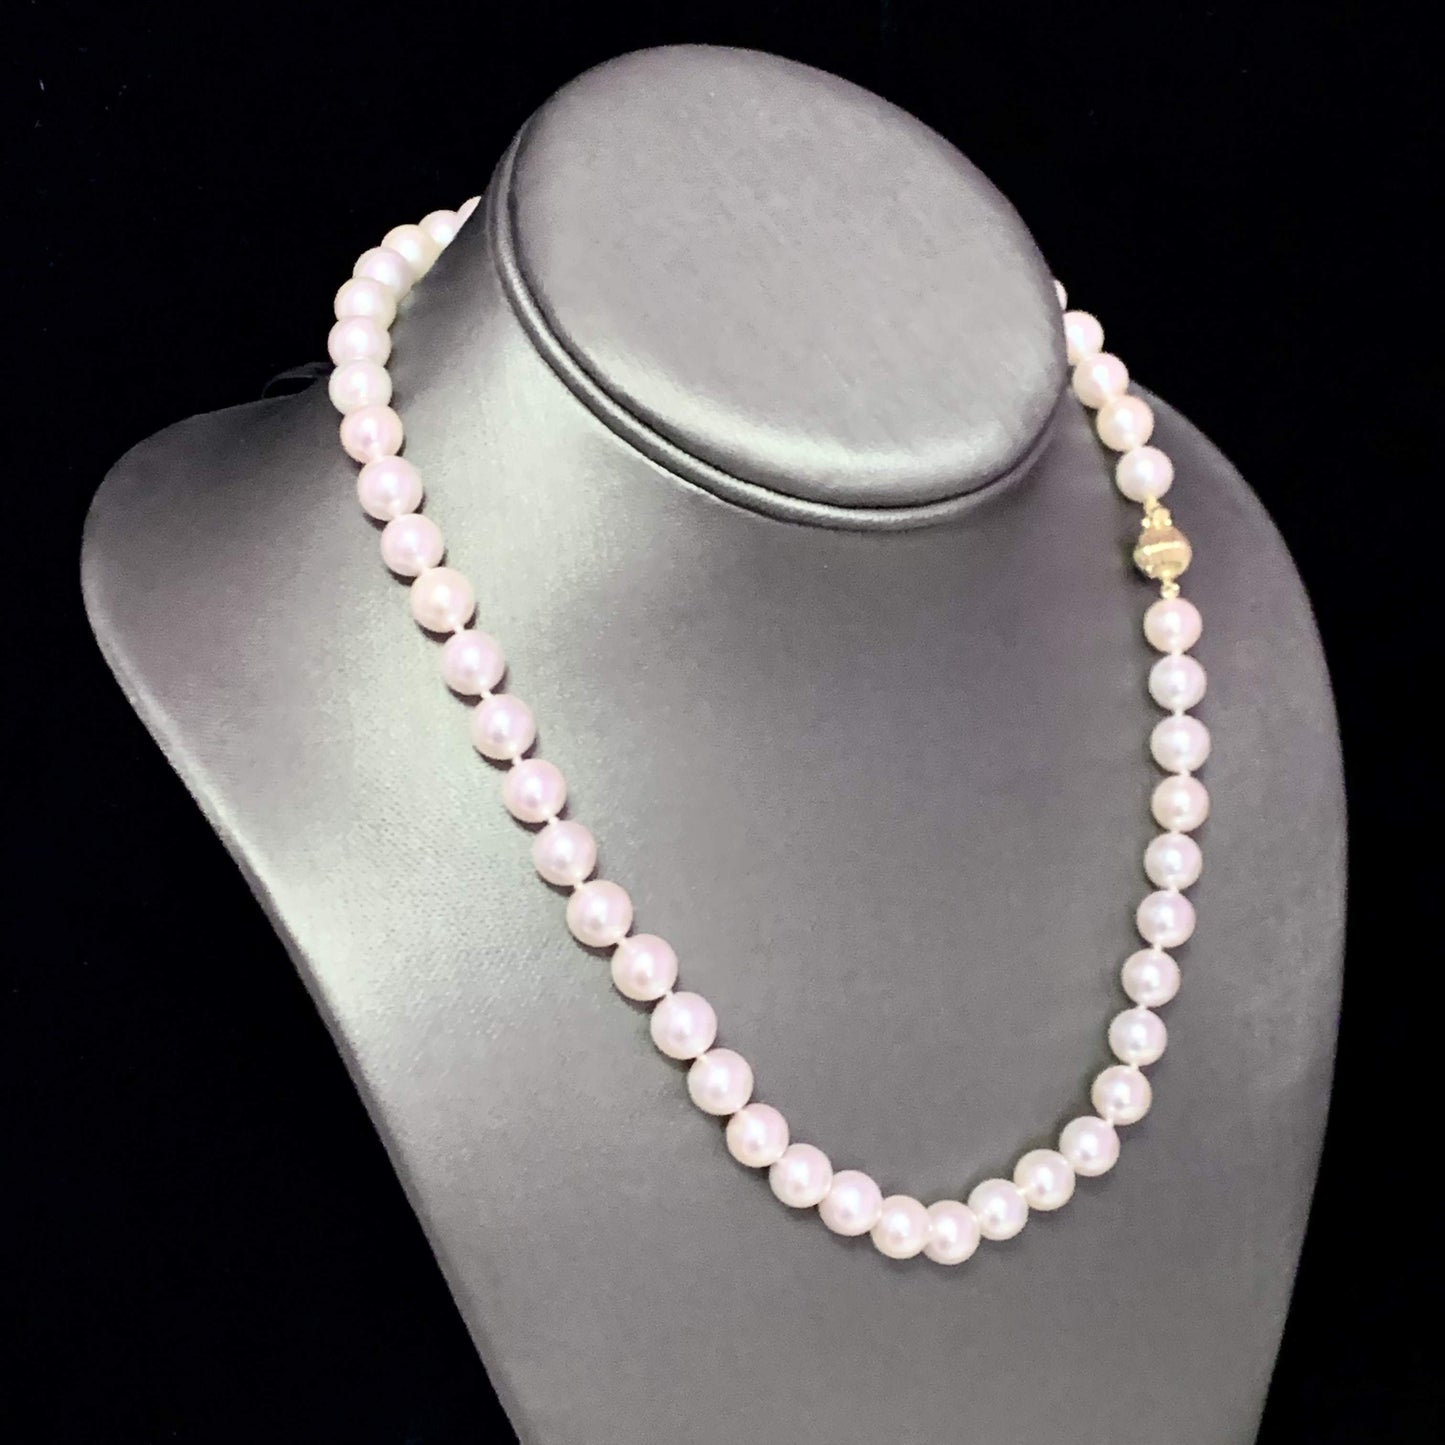 Akoya Pearl Necklace 14k Yellow Gold 17" 8.5 mm Certified $4,950 114453 - Certified Estate Jewelry